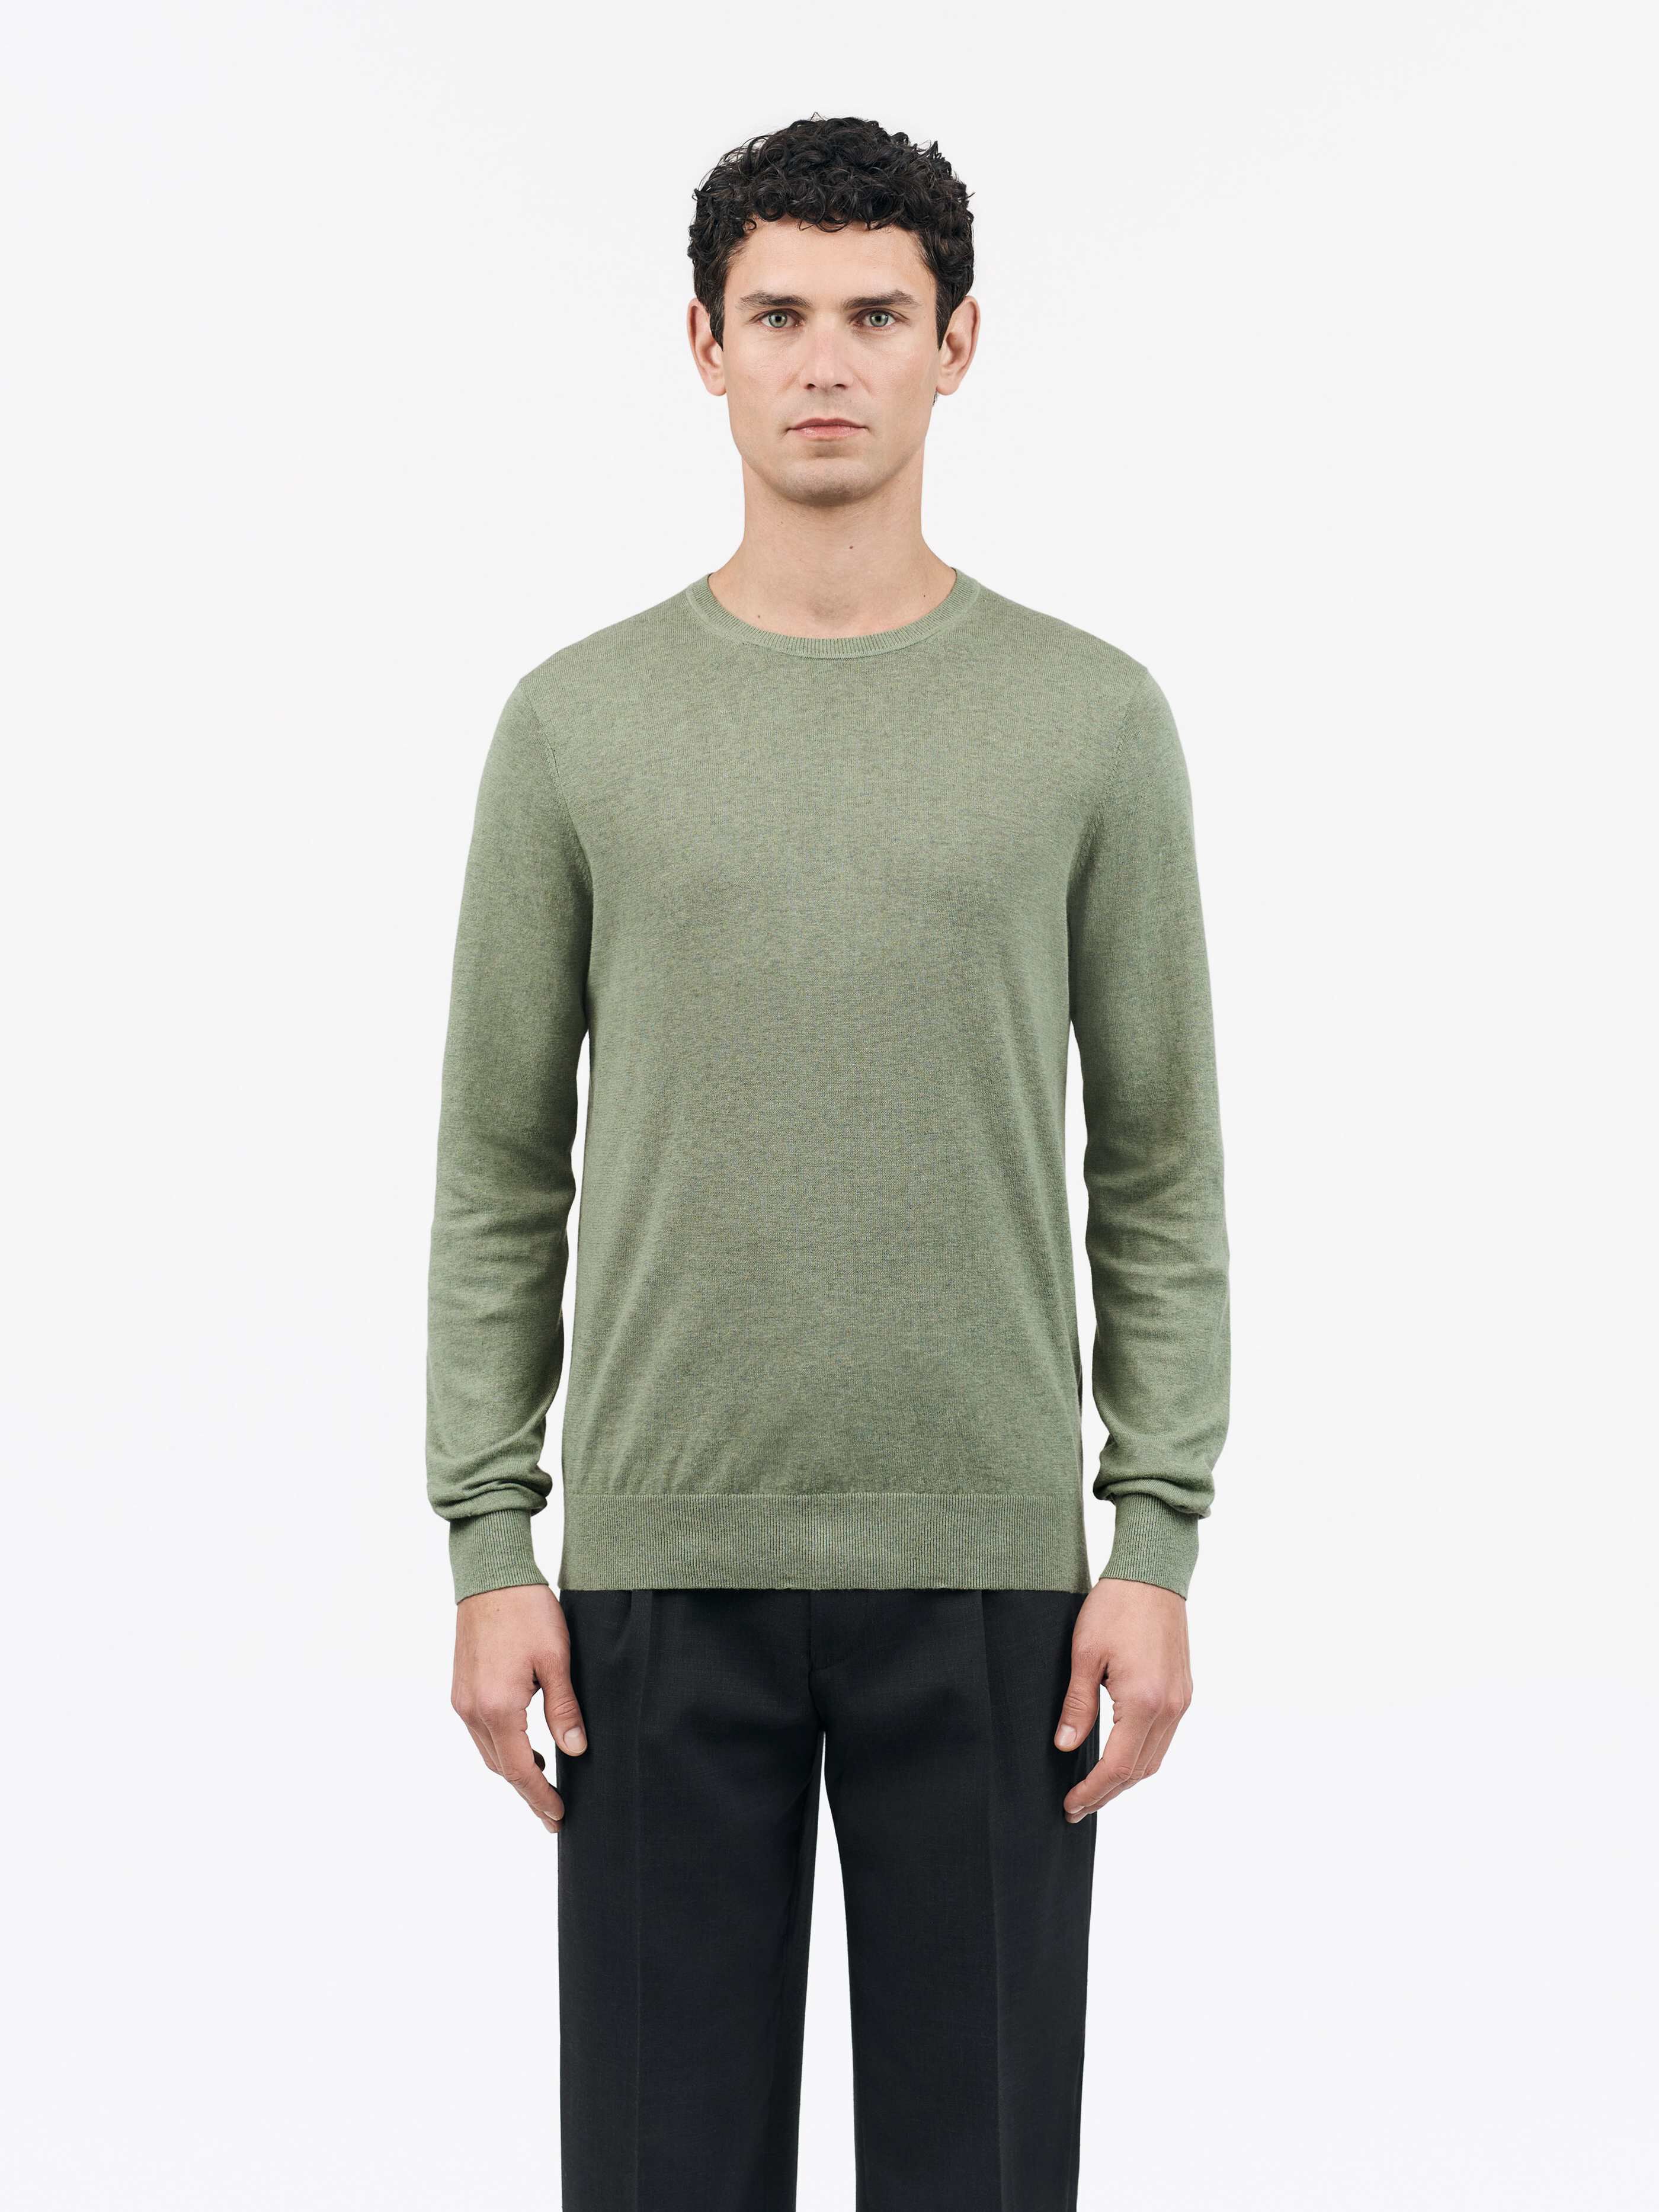 TIGER OF SWEDEN Michas Pullover in Green T72307001  | Shop from eightywingold an official brand partner for Tiger of Sweden Canada and US.